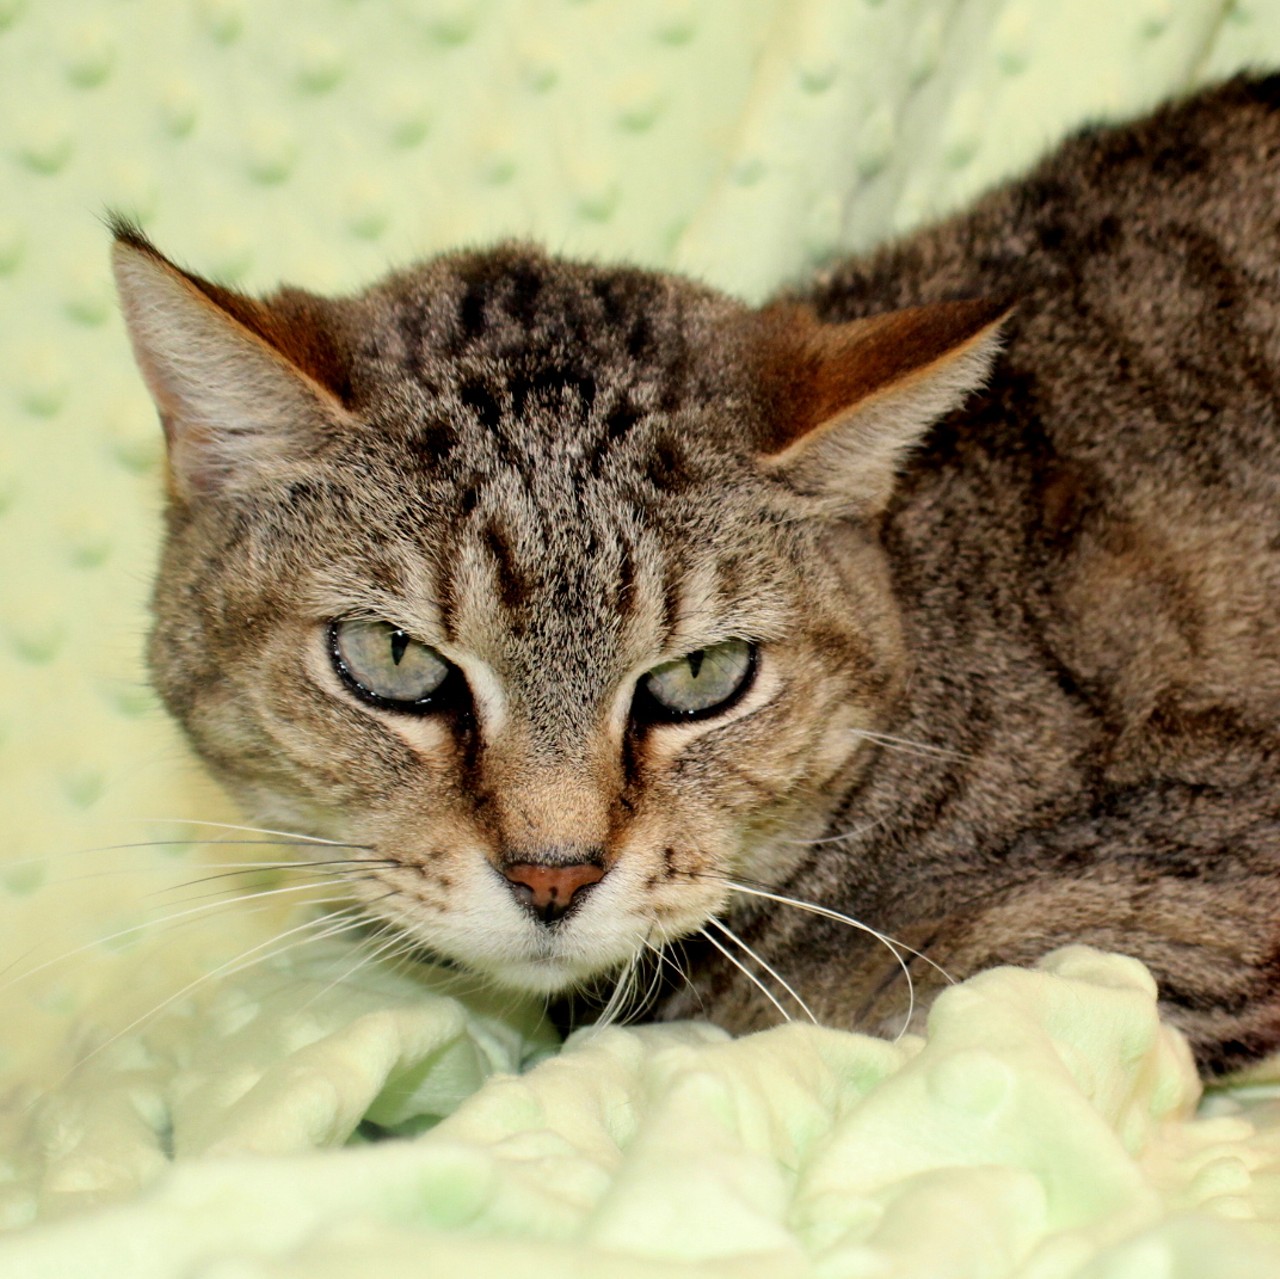 NAME:  Tiny 
GENDER: Female
BREED: Domestic Short Hair
AGE: 10 years, 2 months
WEIGHT: 8 pounds
SPECIAL CONSIDERATIONS: None
REASON I CAME TO MHS: Owner passed away
LOCATION: Mackey Center for Animal Care in Detroit
ID NUMBER: 865194